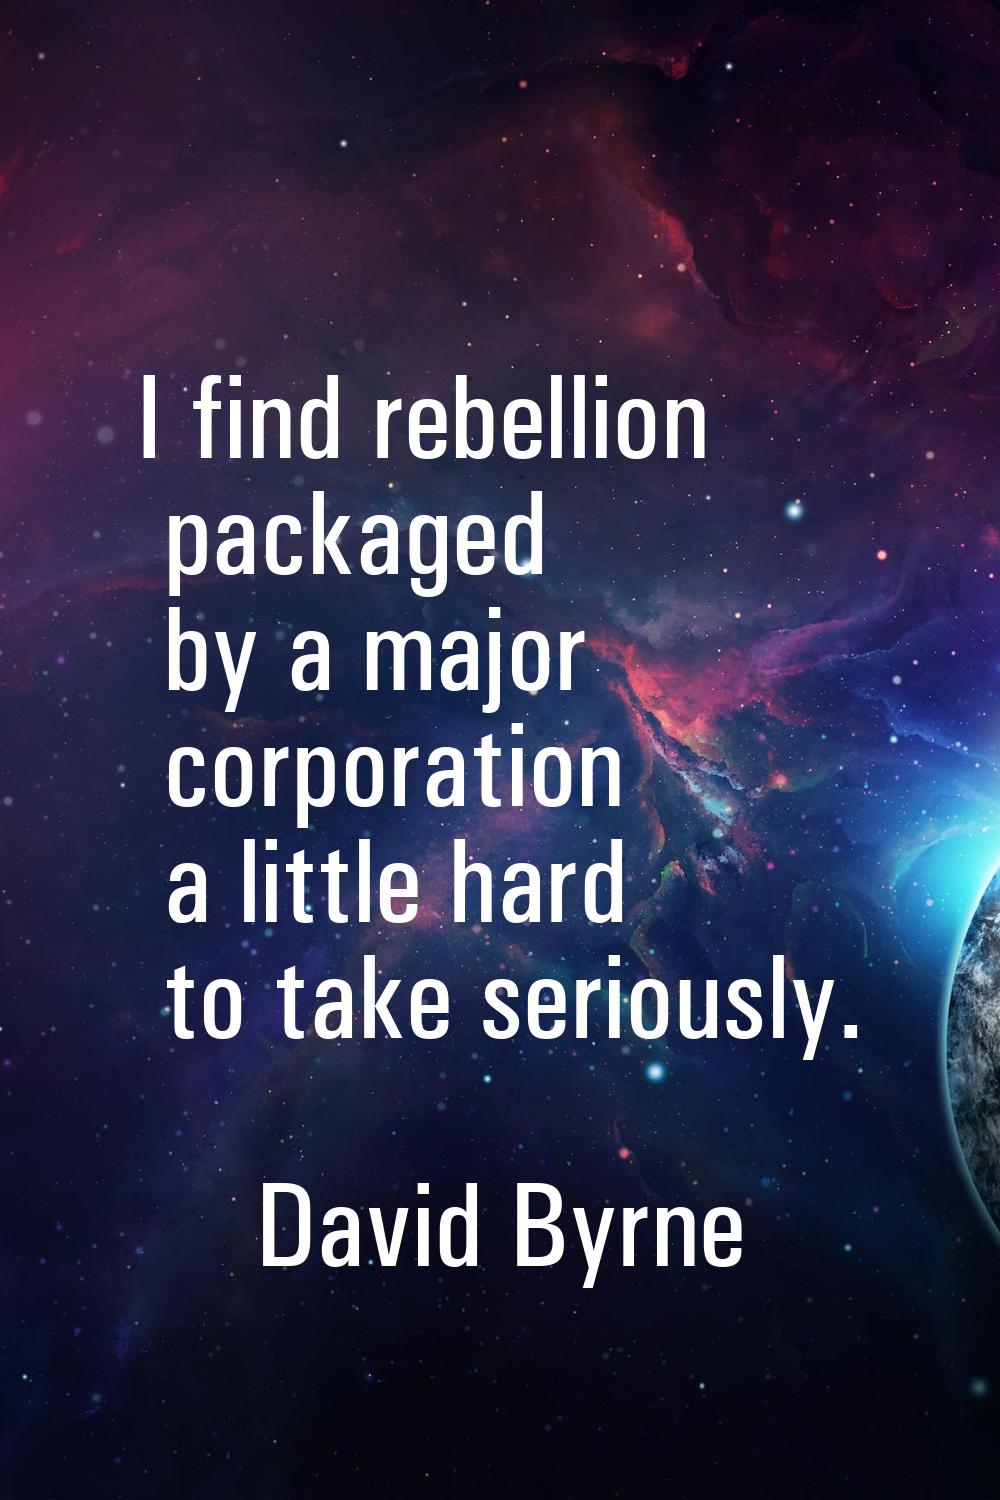 I find rebellion packaged by a major corporation a little hard to take seriously.